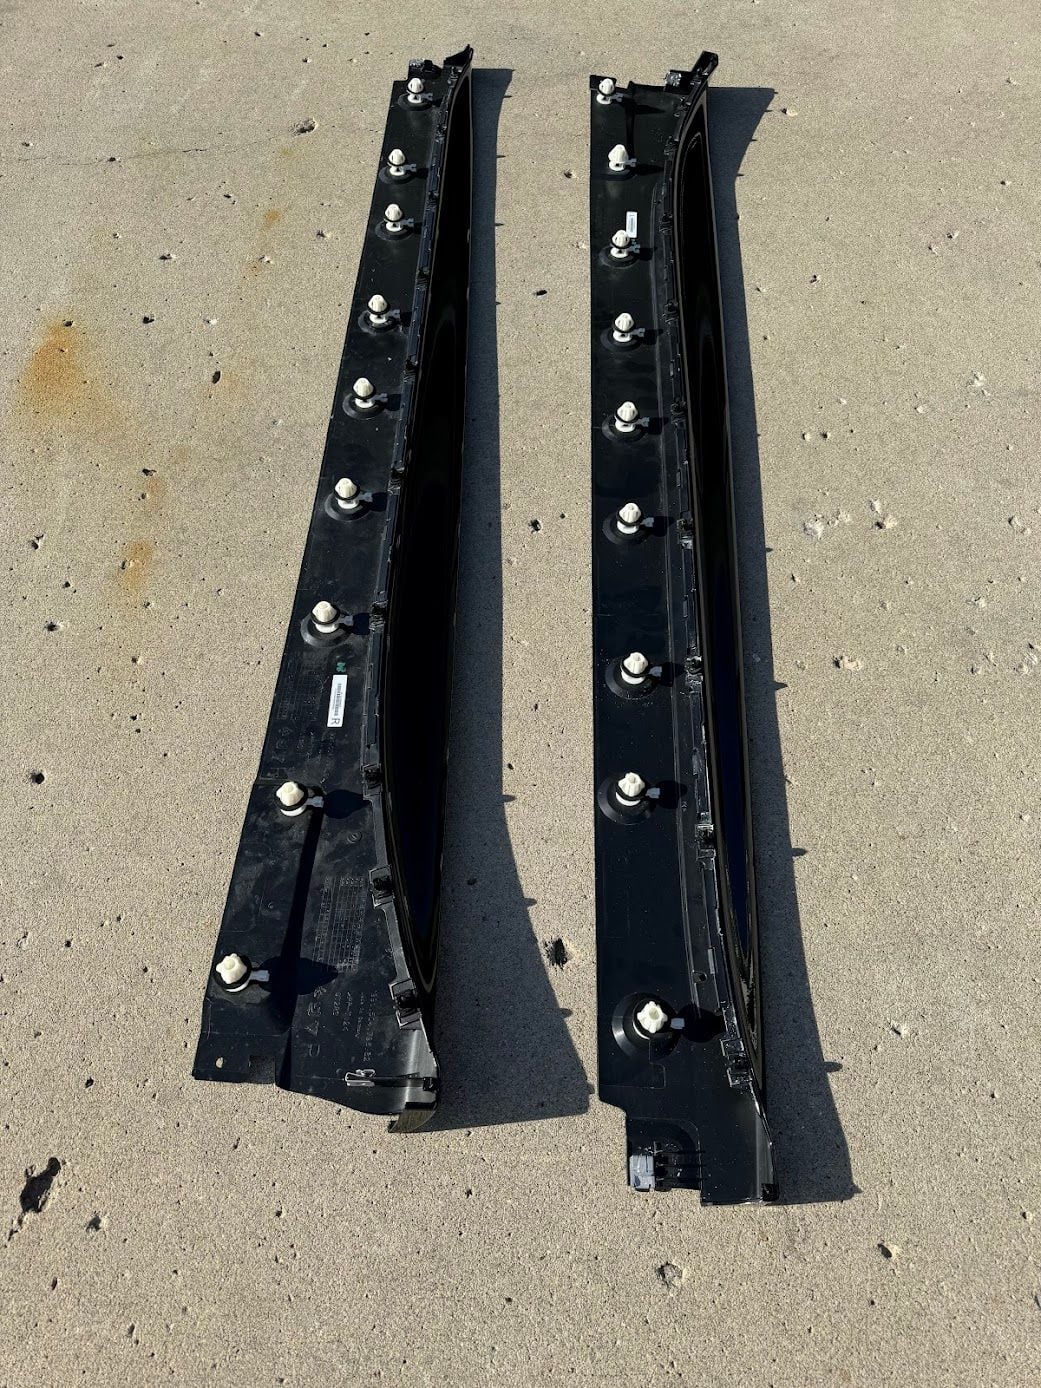 Exterior Body Parts - GT3 side skirts for a 911. Painted AND PPF'd - New - Fargo, ND 58103, United States